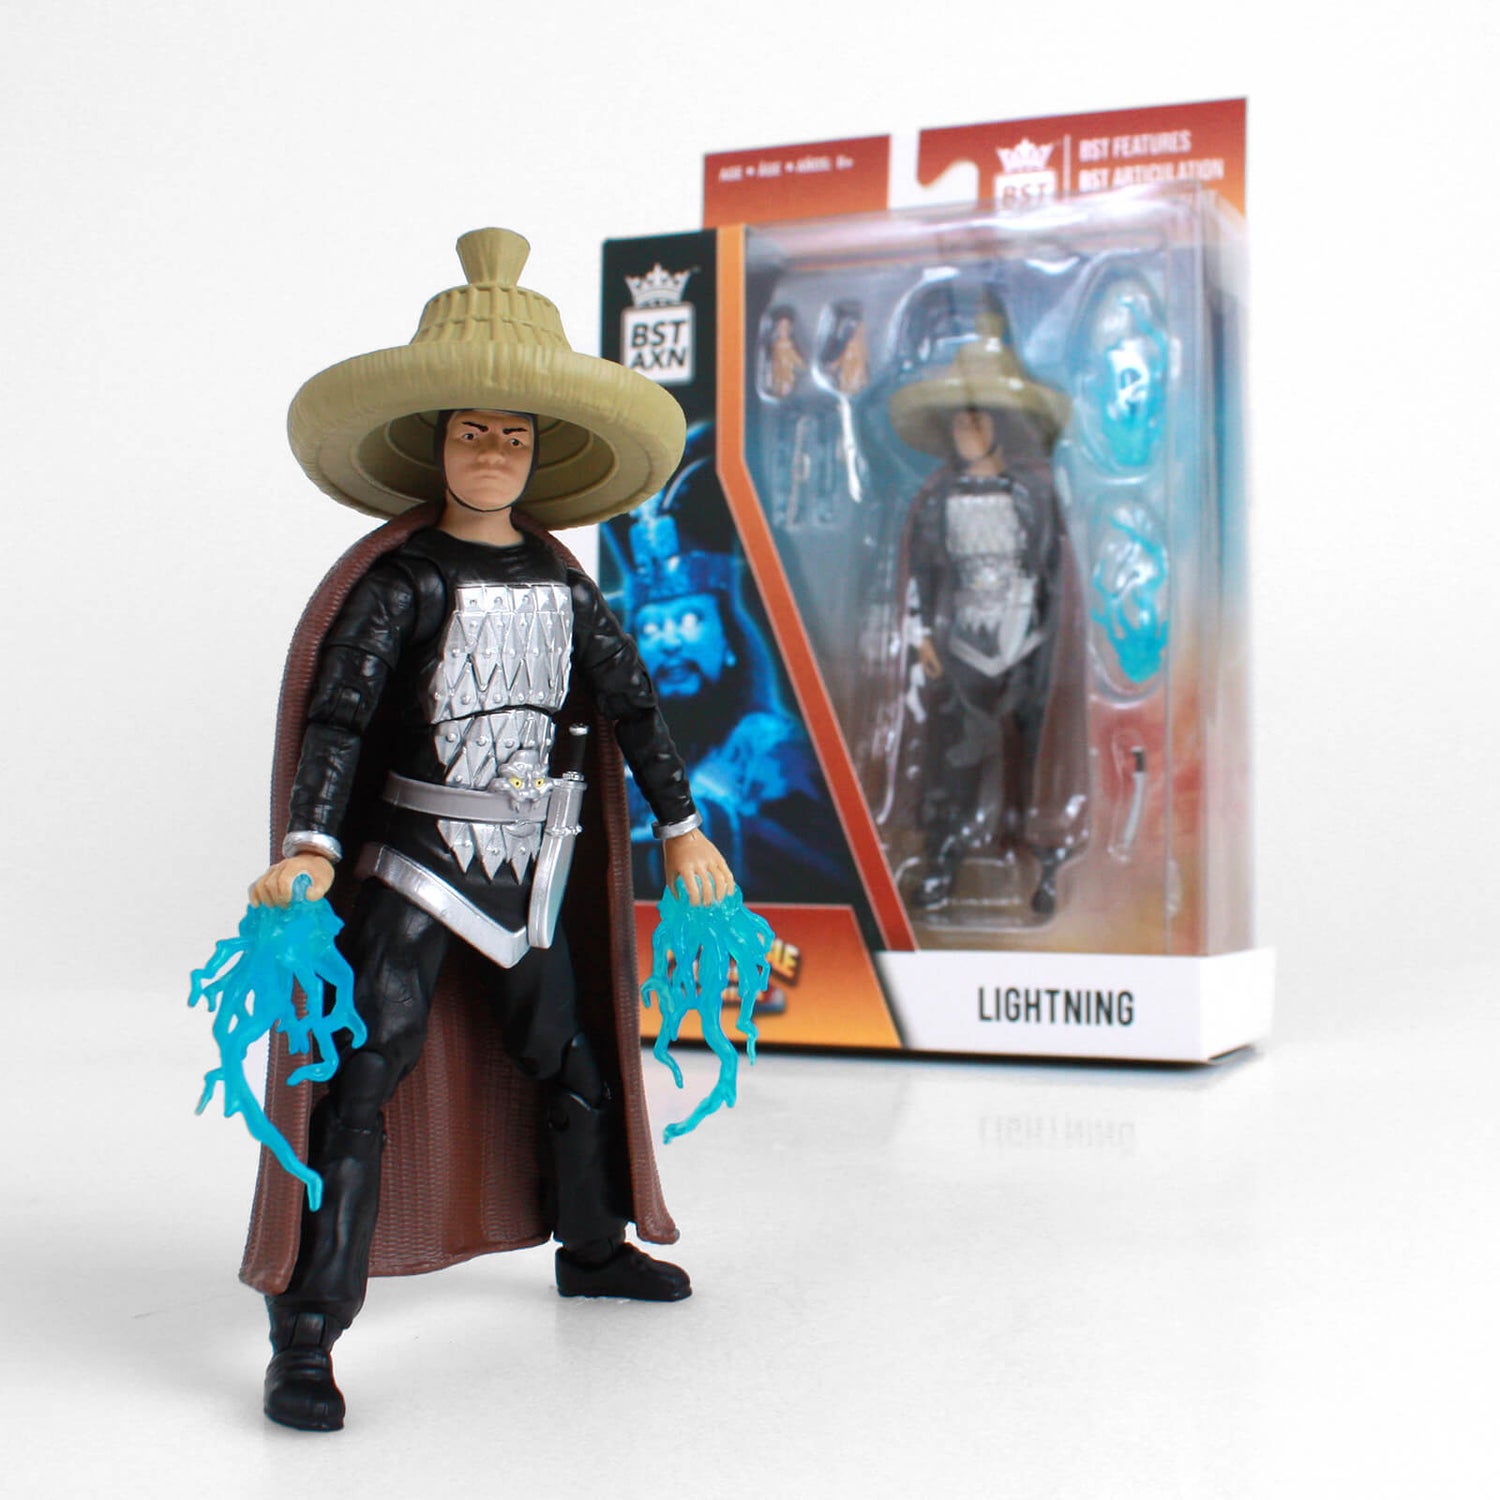 The Loyal Subjects BST AXN Big Trouble In Little China 5in Action Figure - Lightning